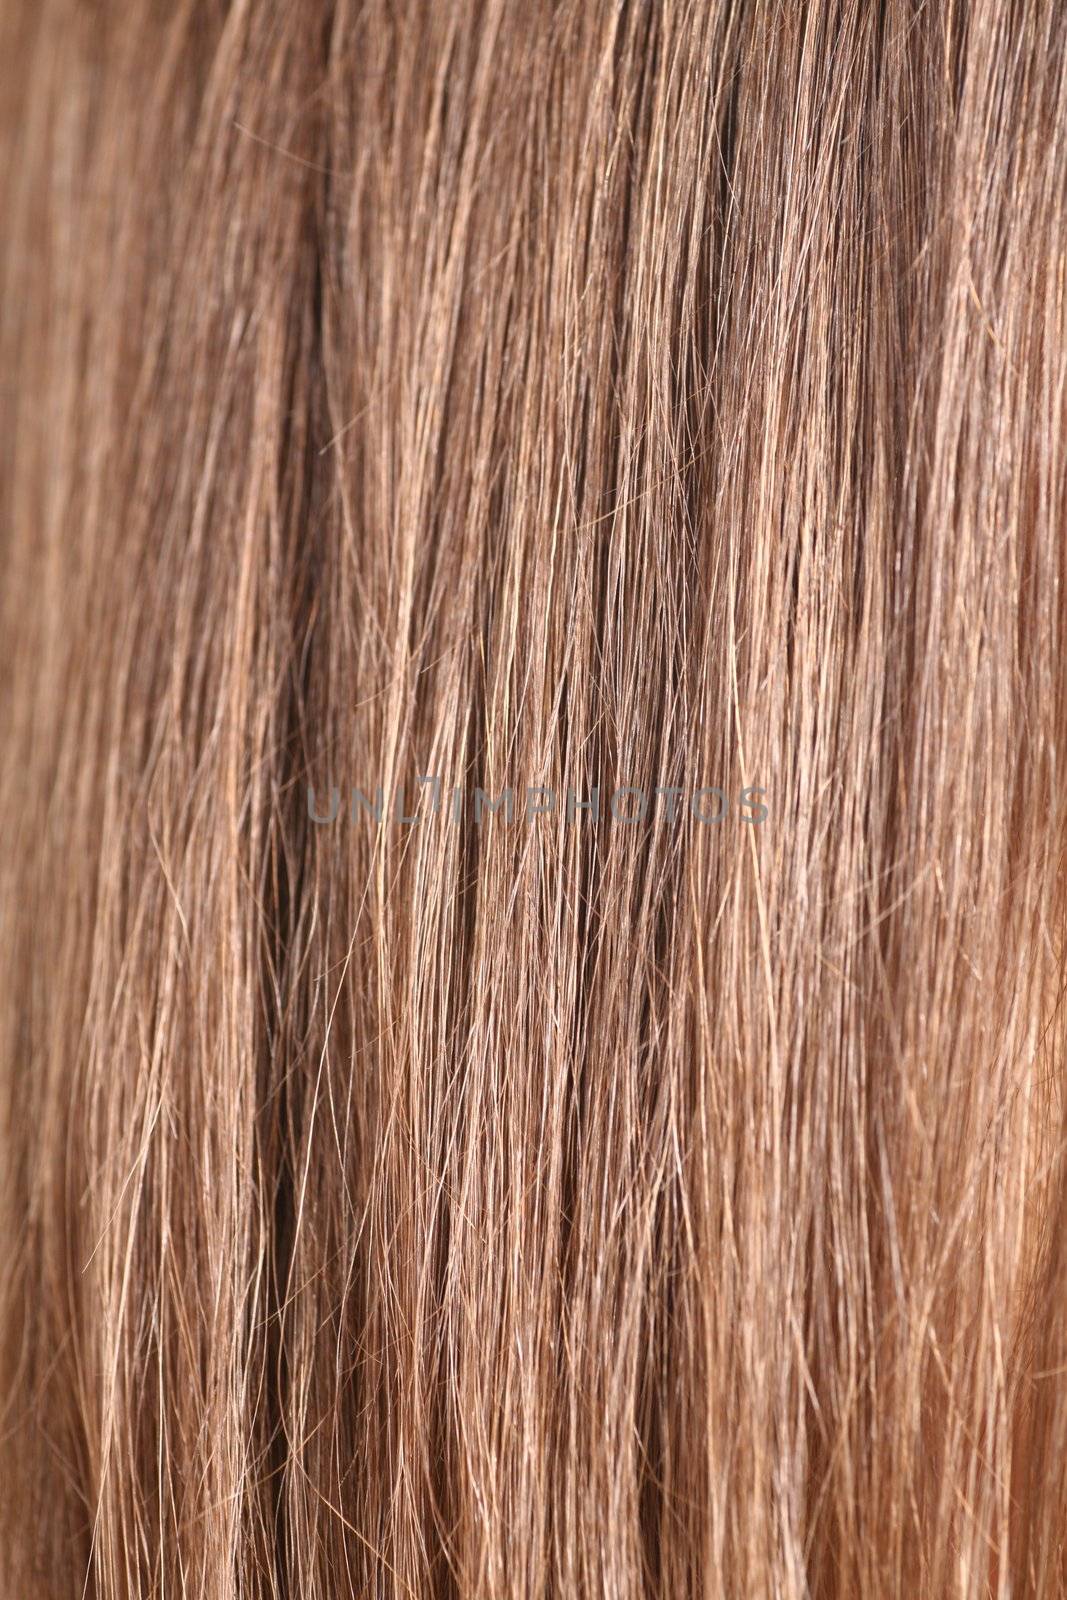 close-up of hair struc ture